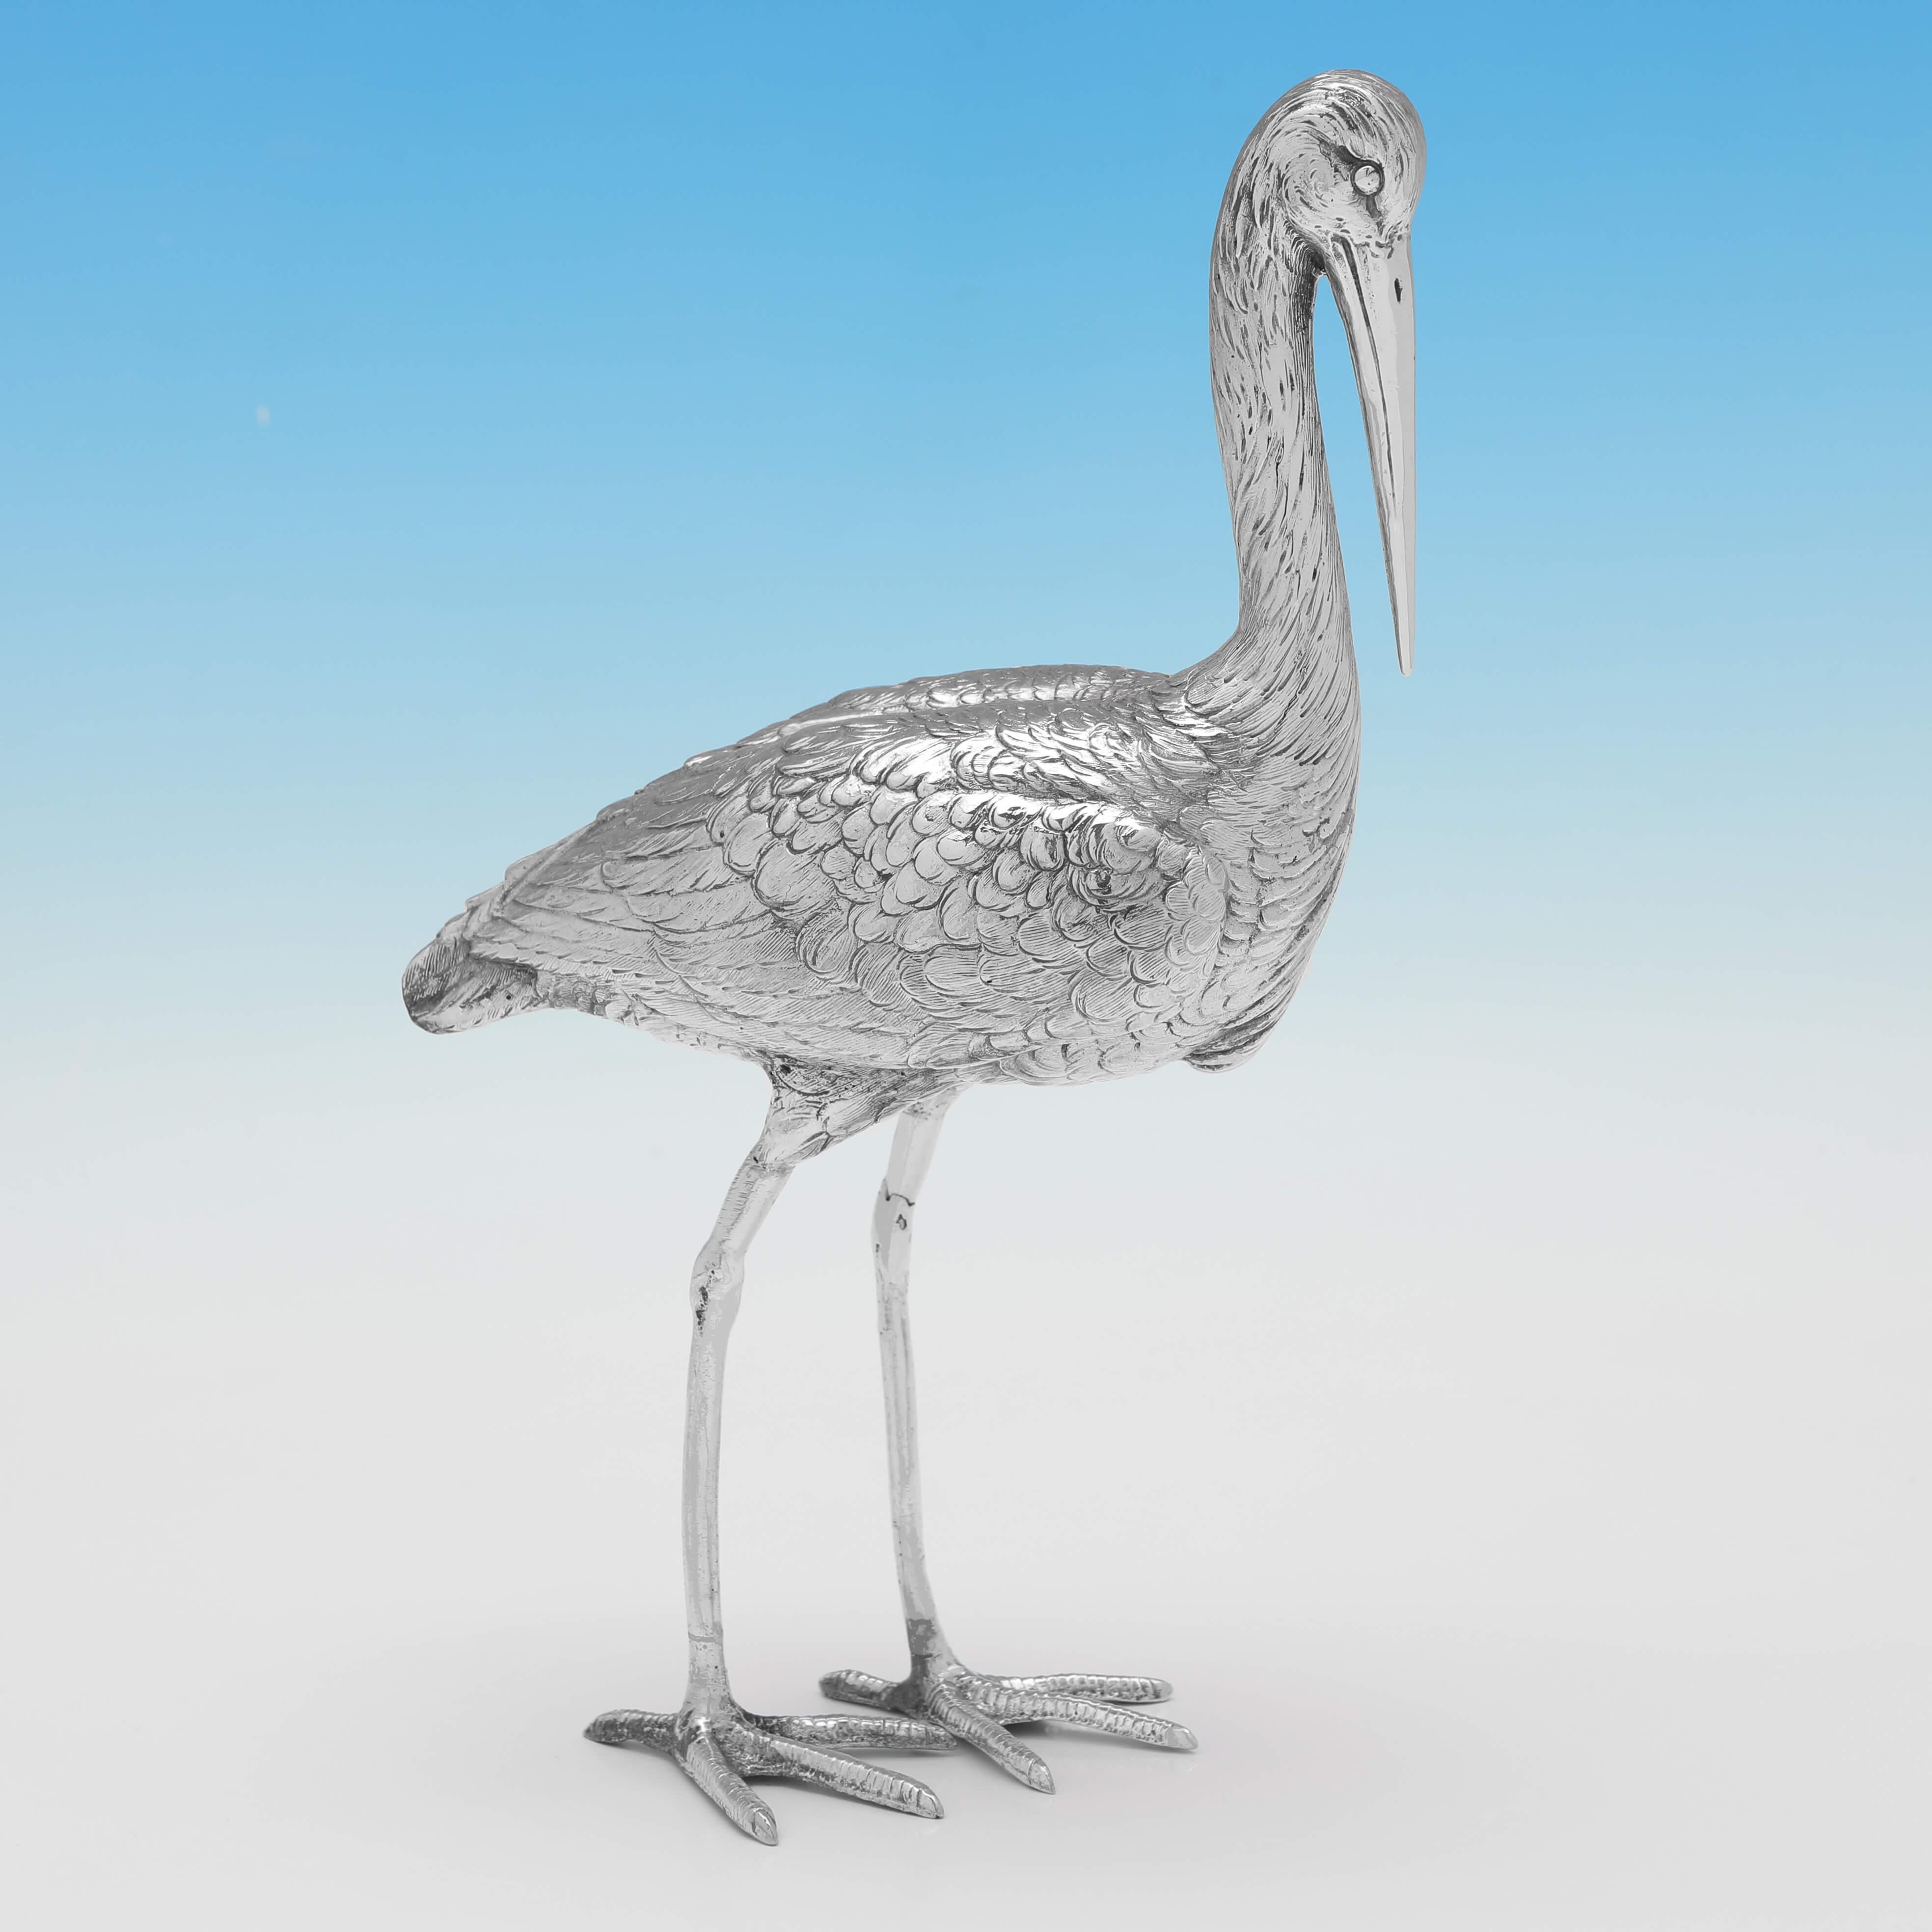 Carrying import marks for Chester in 1908 by Berthold Muller, this charming, Antique Sterling Silver Model of a Stork, is realistically cast. 

The stork measures 9.25